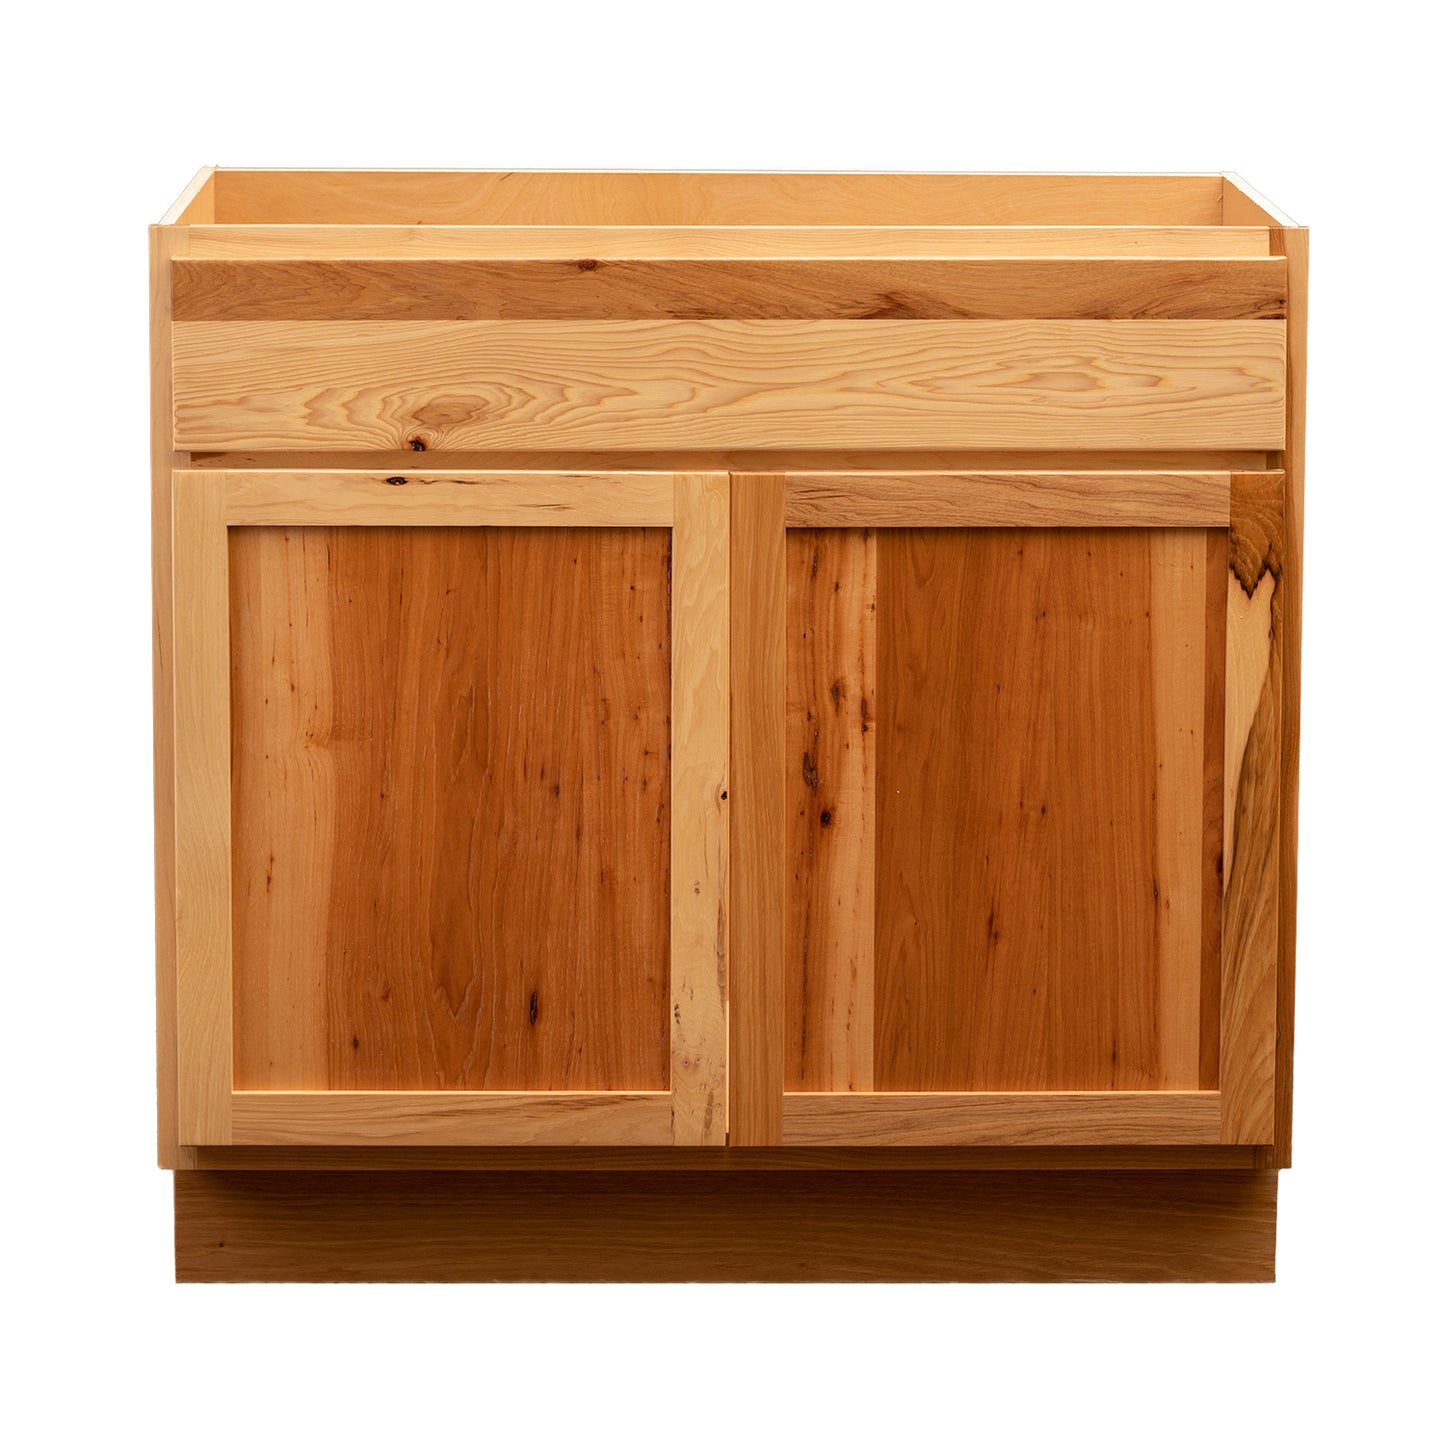 Quicklock RTA (Ready-to-Assemble) Rustic Hickory Vanity Base Cabinet | 30"Wx34.5"Hx18"D